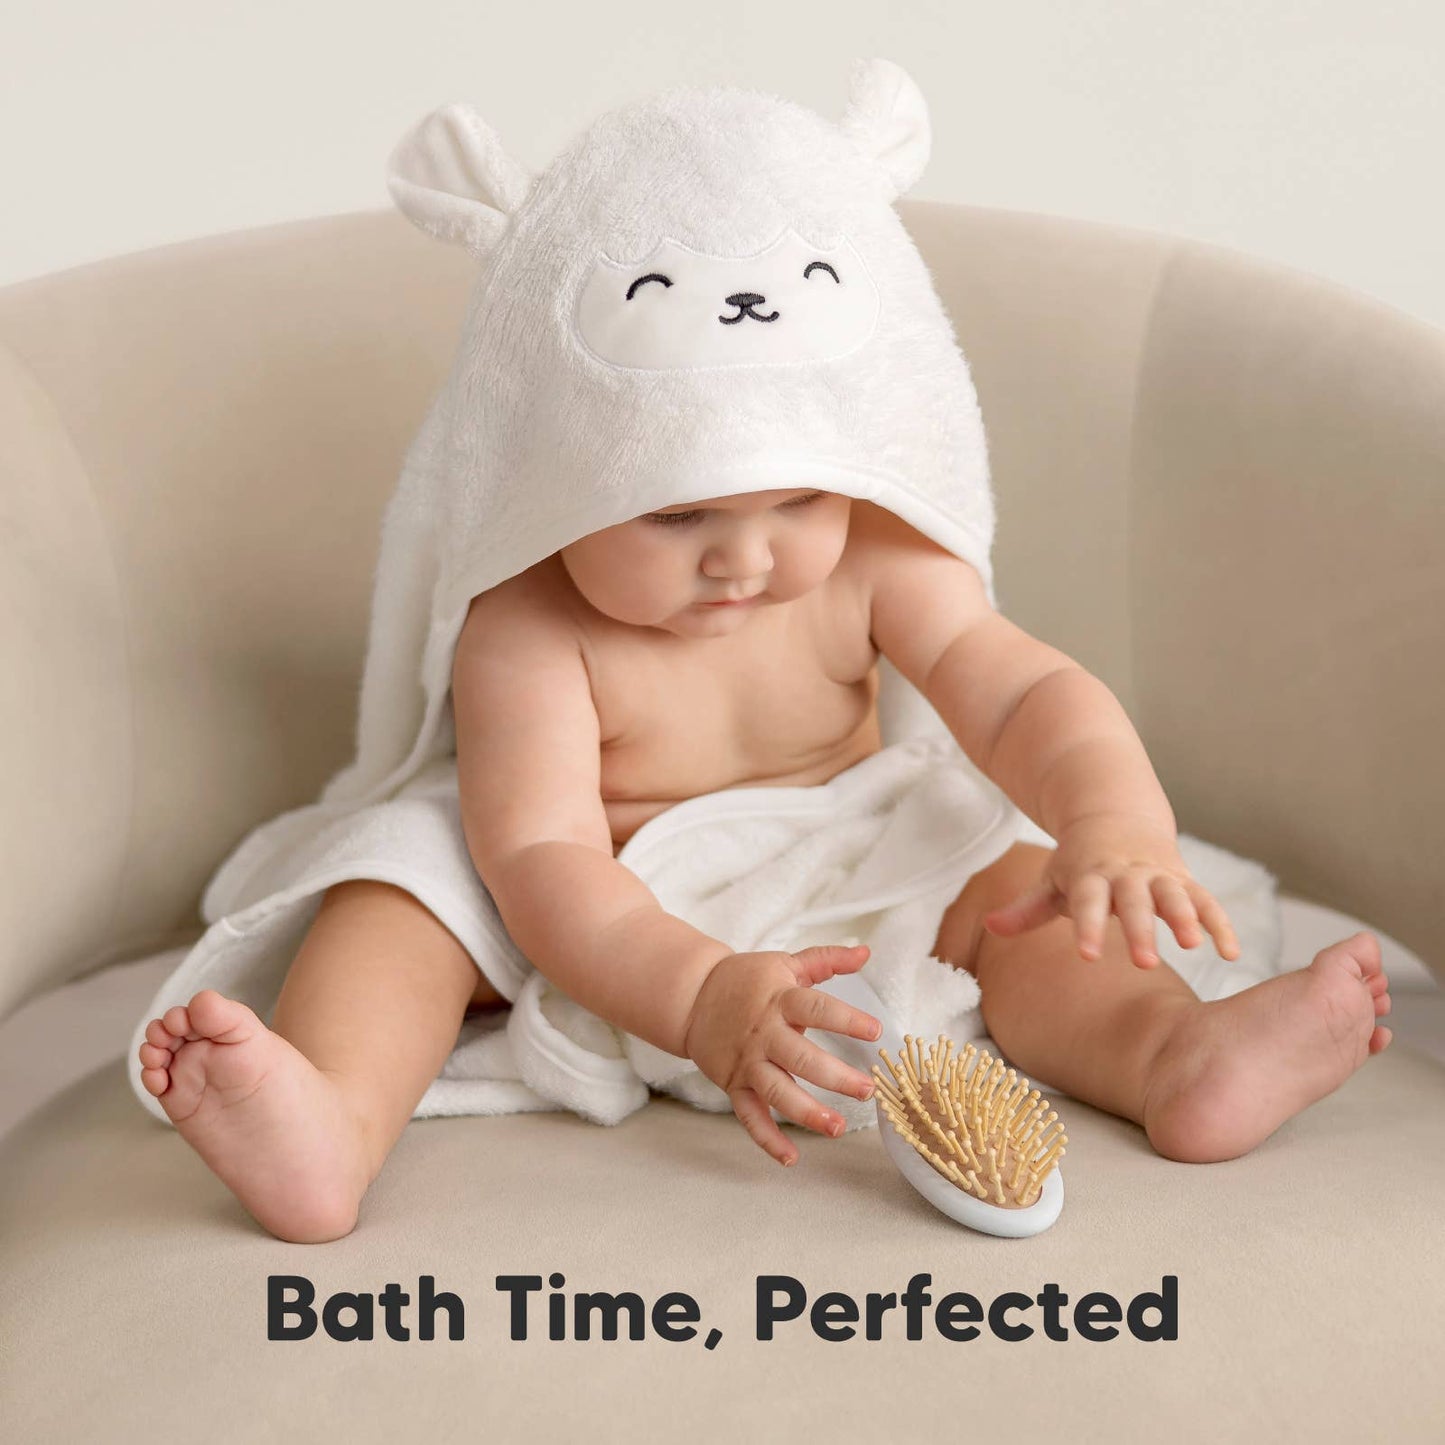 Cuddly Lamb Baby Hooded Towel